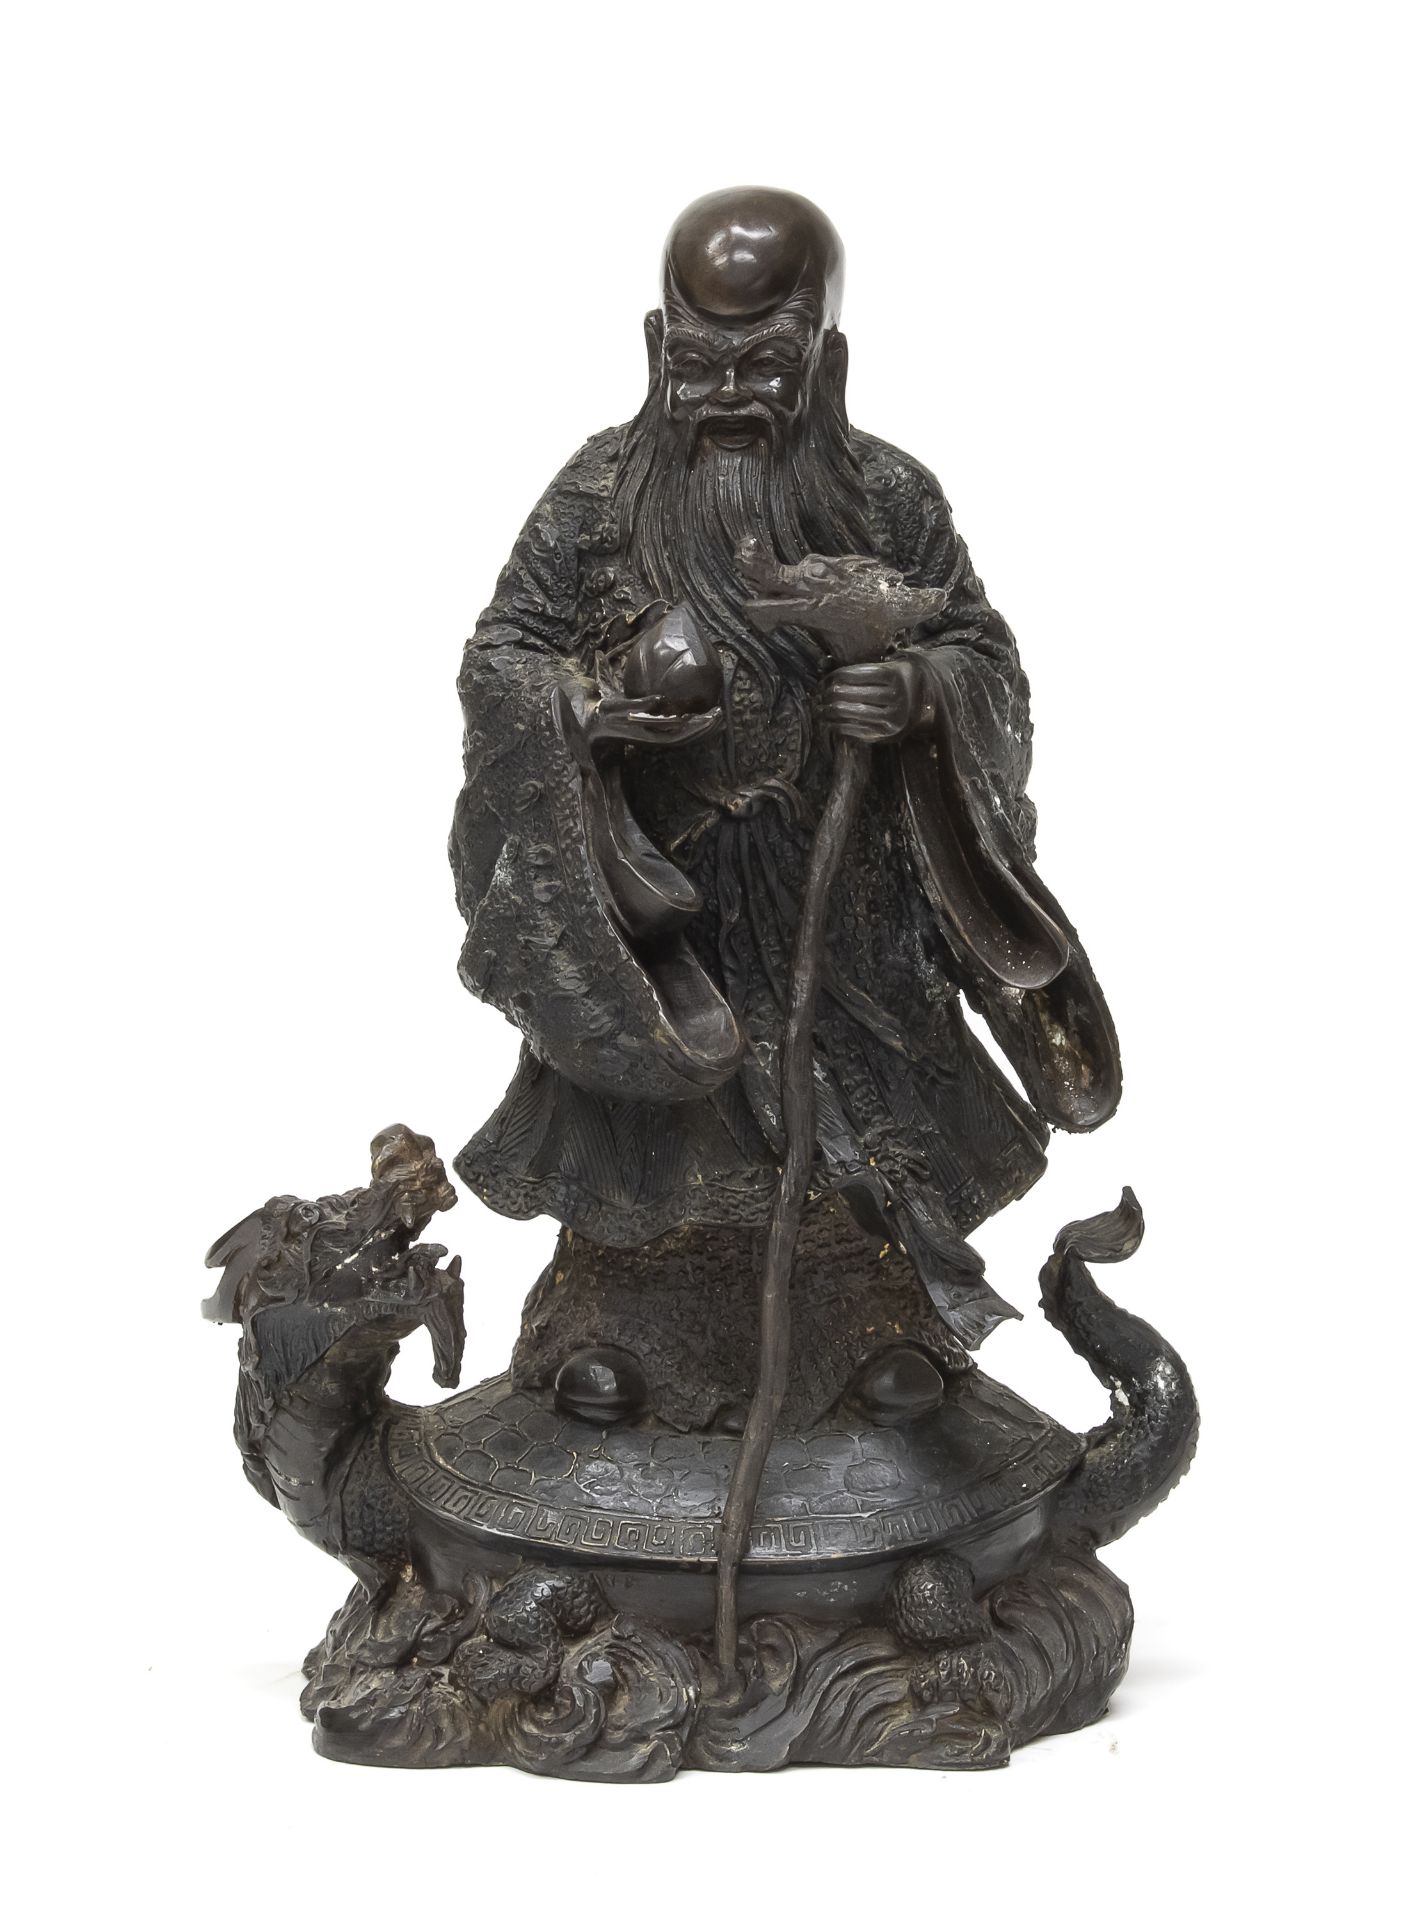 A CHINESE BRONZE SCULPTURE OF SHOU XING. EARLY 20TH CENTURY.